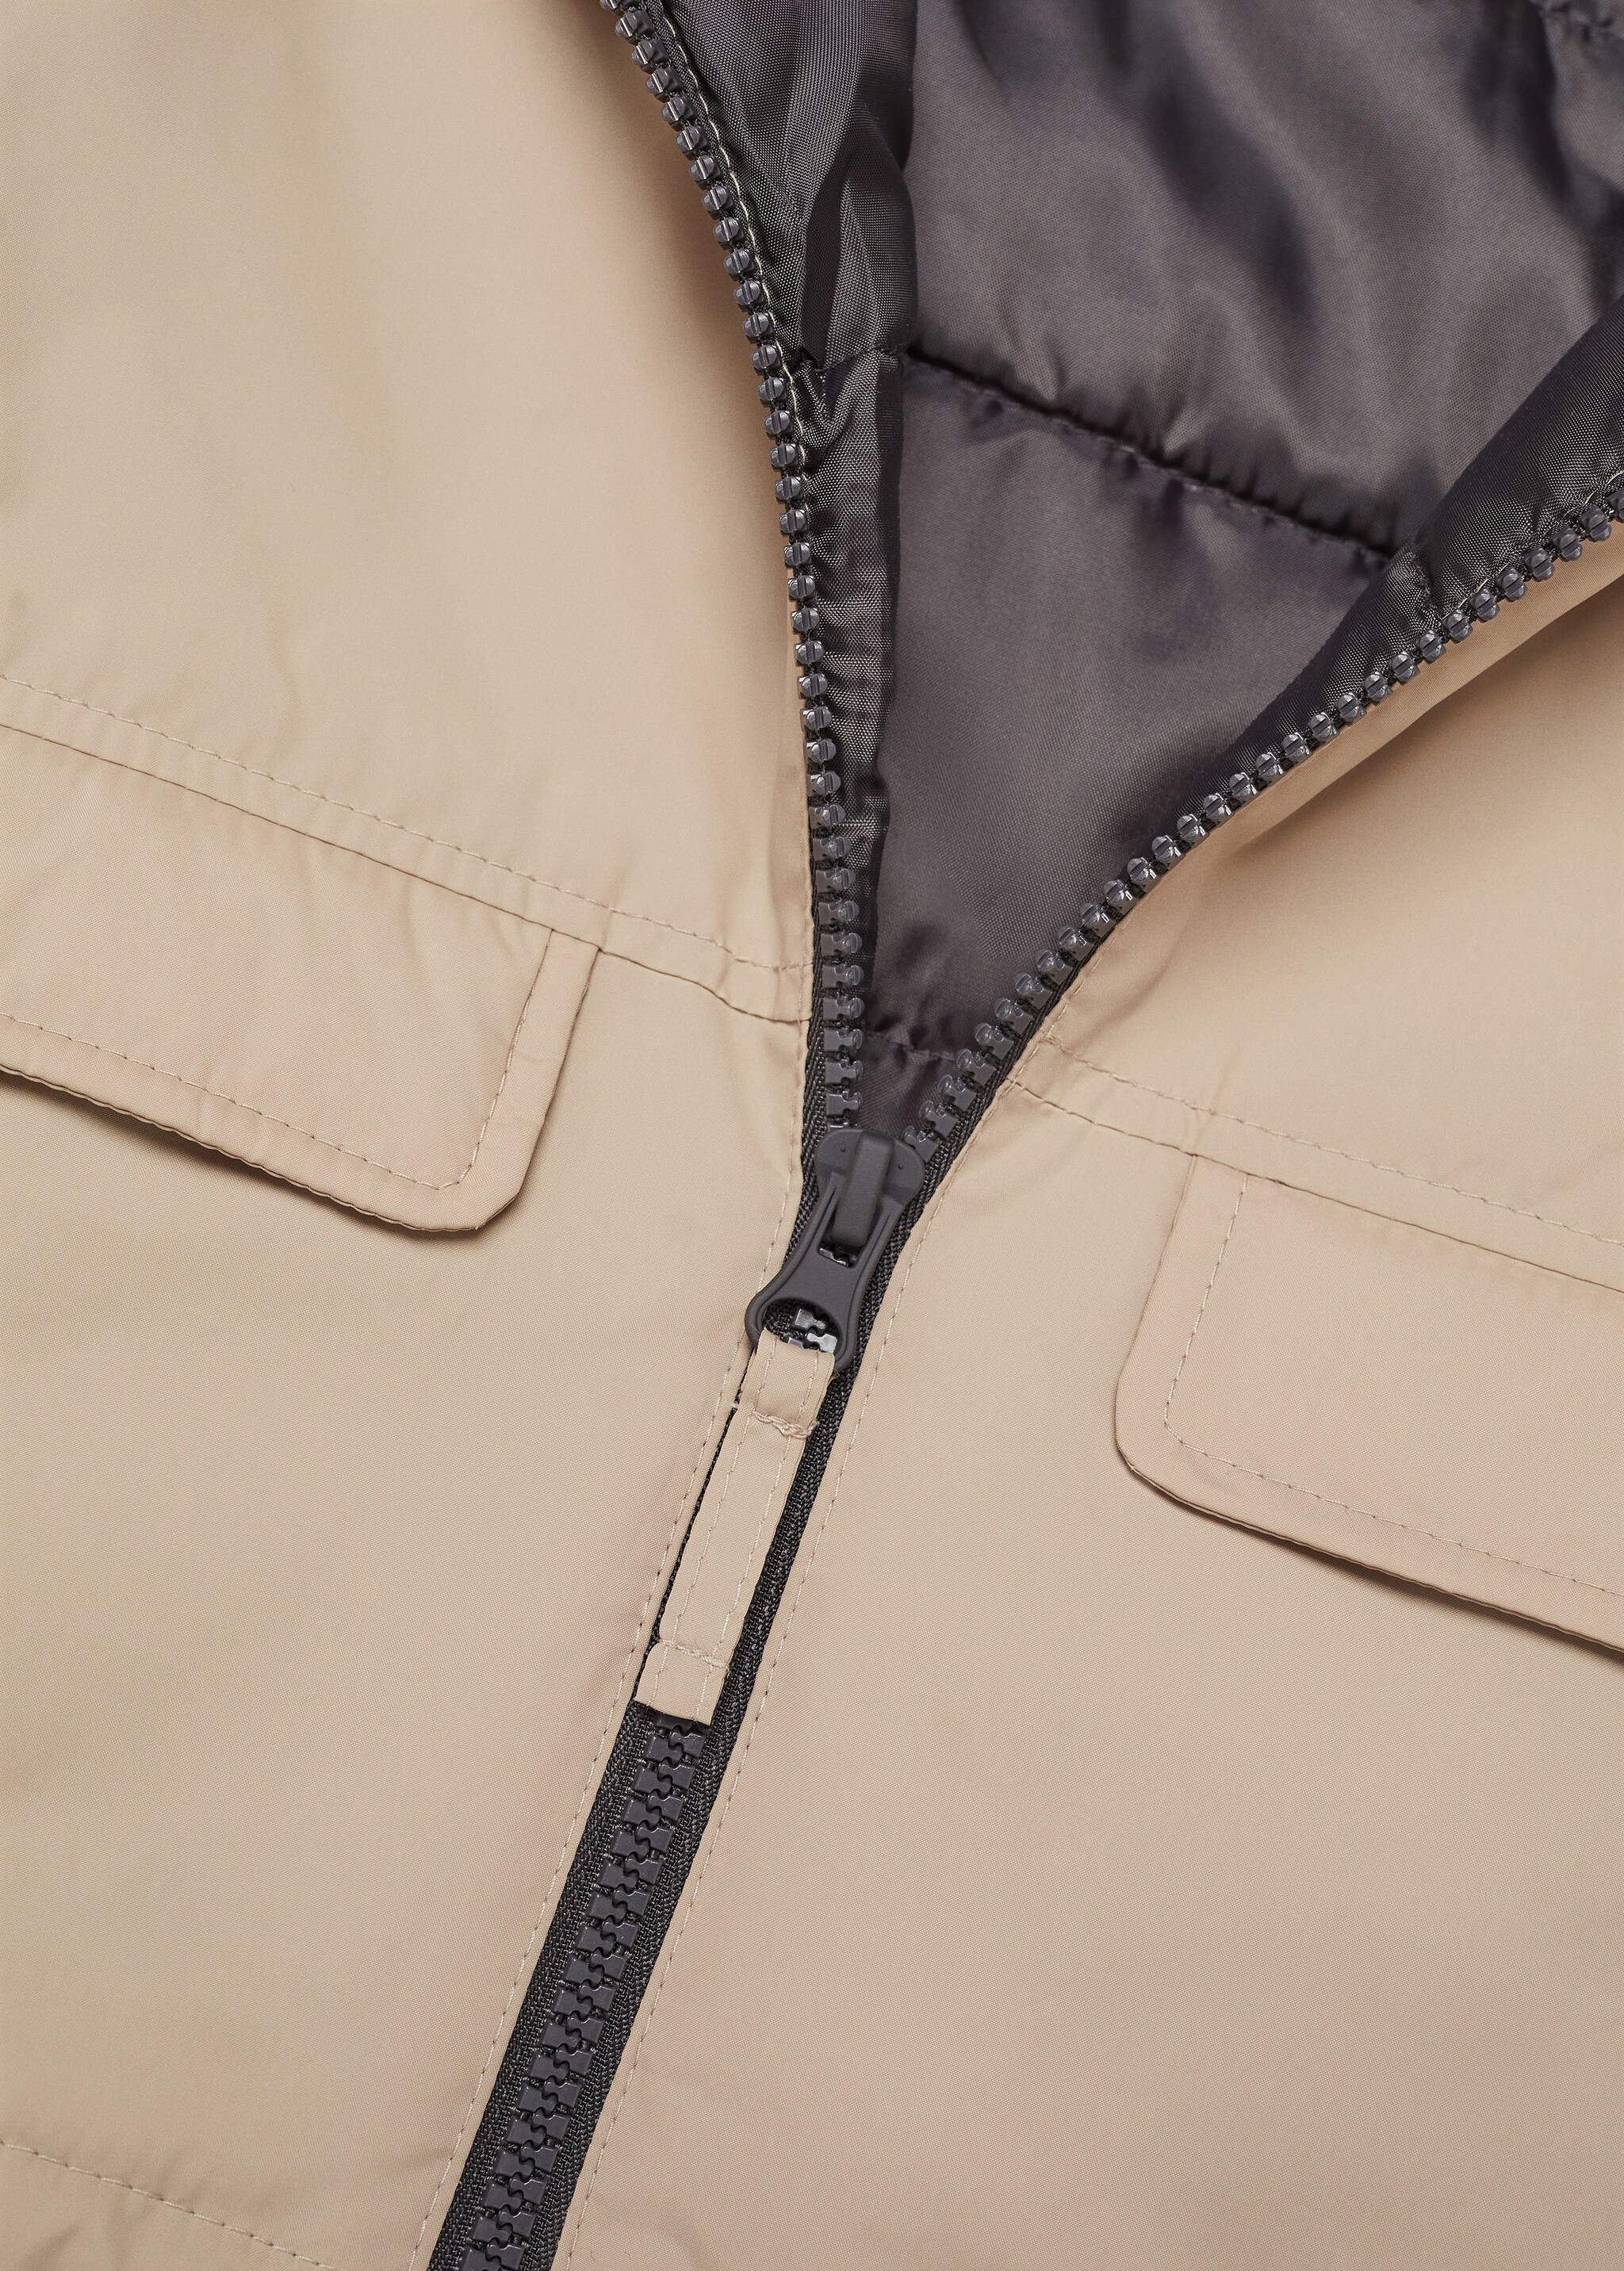 Hooded coat - Details of the article 0